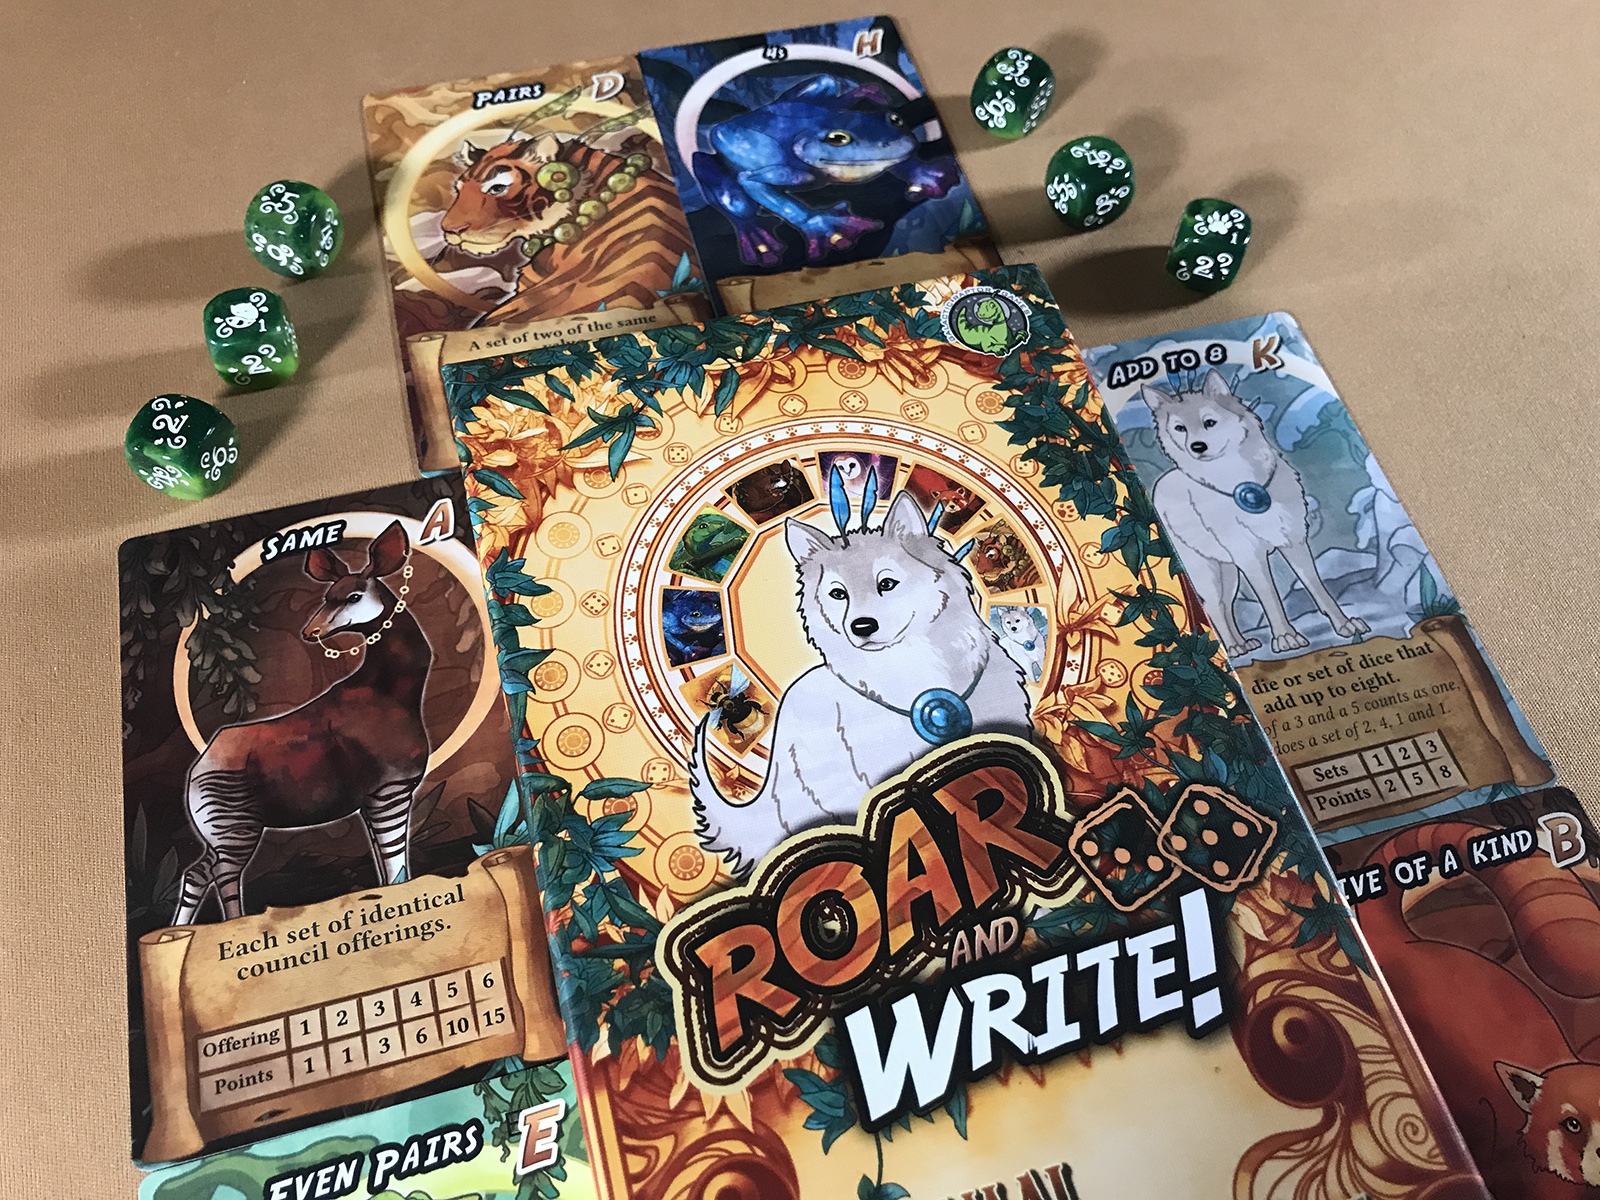 Ruling (and Rolling) the Animal Kingdom with Roar and Write!